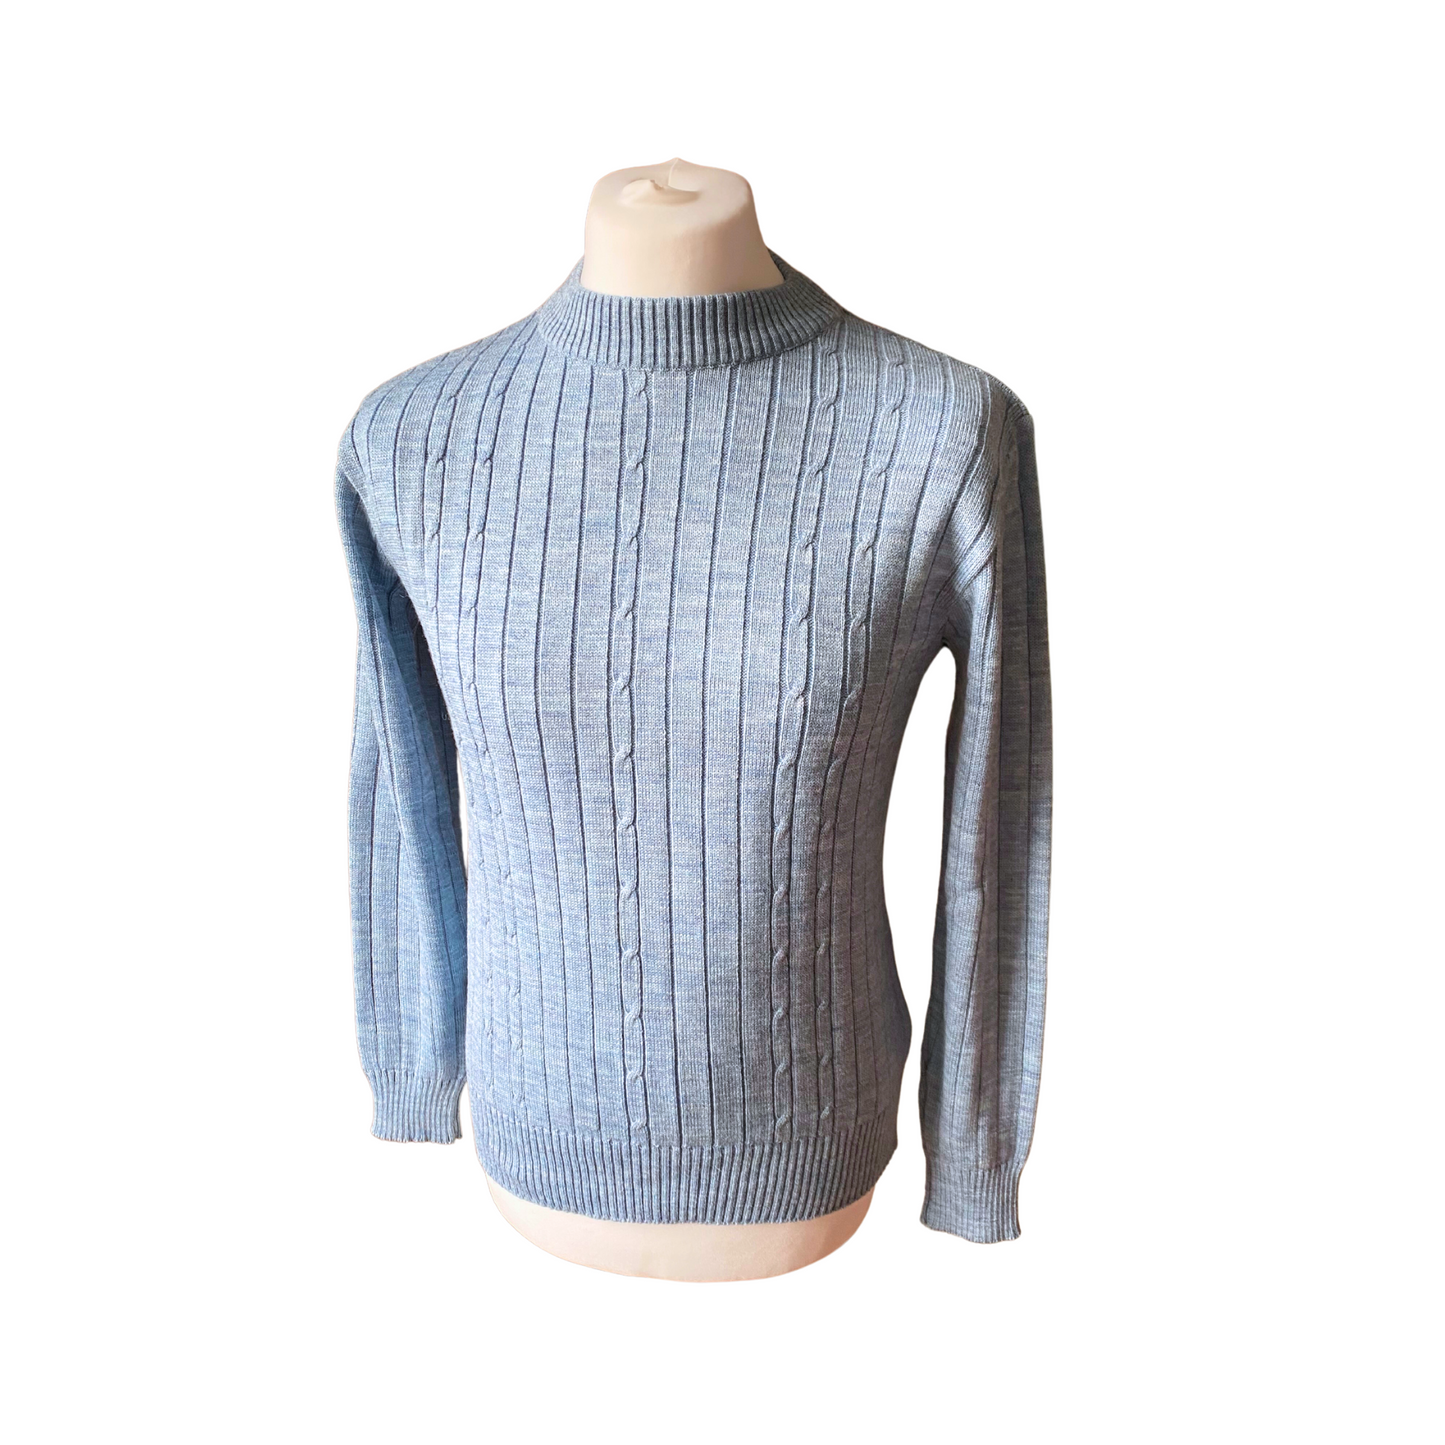 Stylish blue cable knit vintage jumper - on male mannequin 